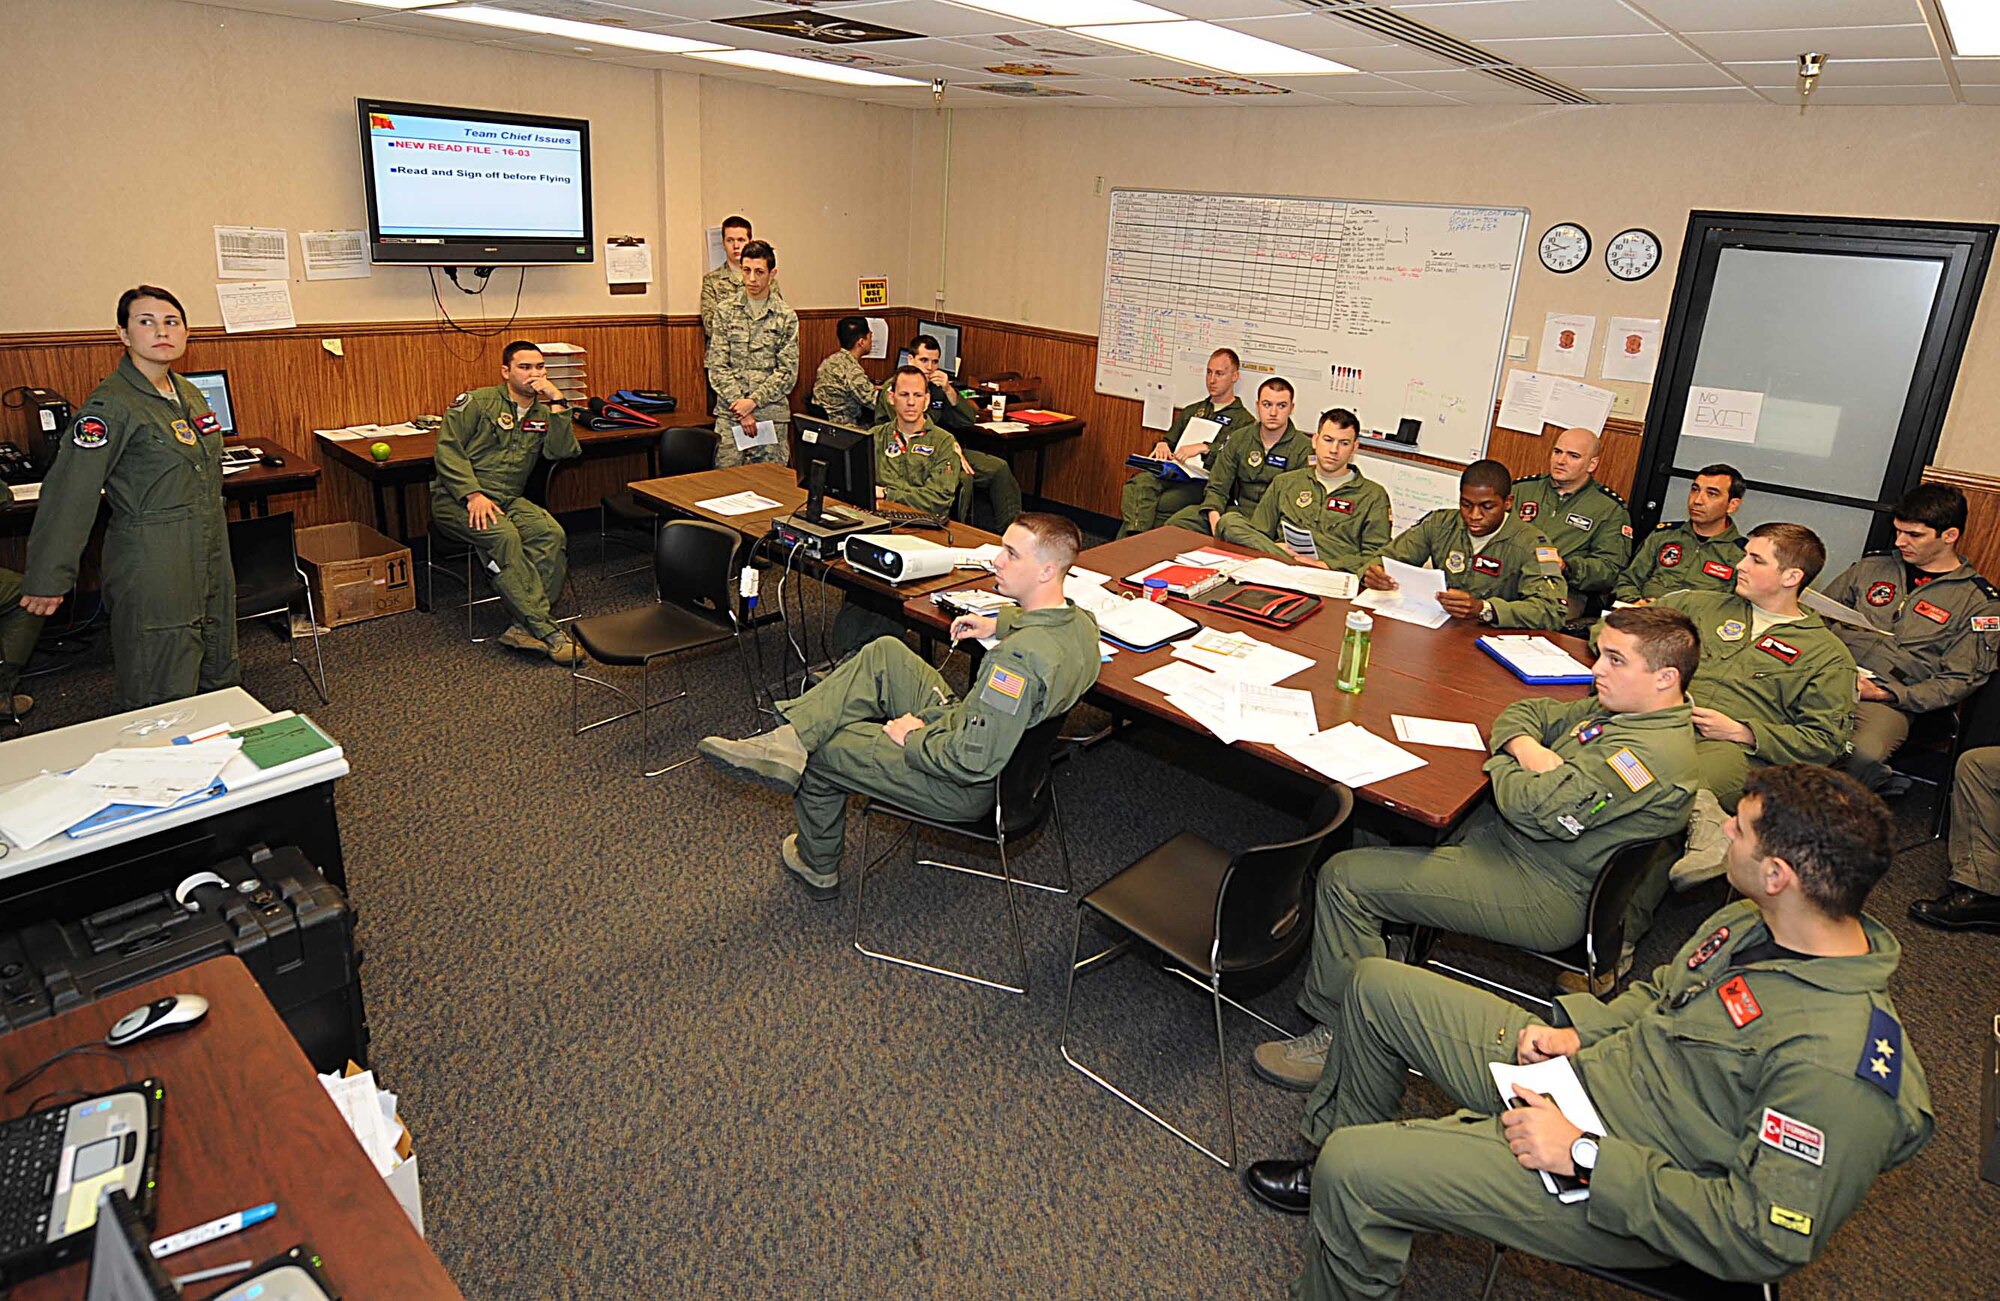 First Lt. Adria Trgovich, 350th Air Refueling Squadron navigator, briefs aircrews from the U.S. and Turkish air forces before their flights, March 8, 2016, at Nellis Air Force Base, Nev. The crews flew the first-ever joint KC-135 Stratotanker formation flights during Red Flag 16-2. (U.S. Air Force photo/Senior Airman David Bernal Del Agua)